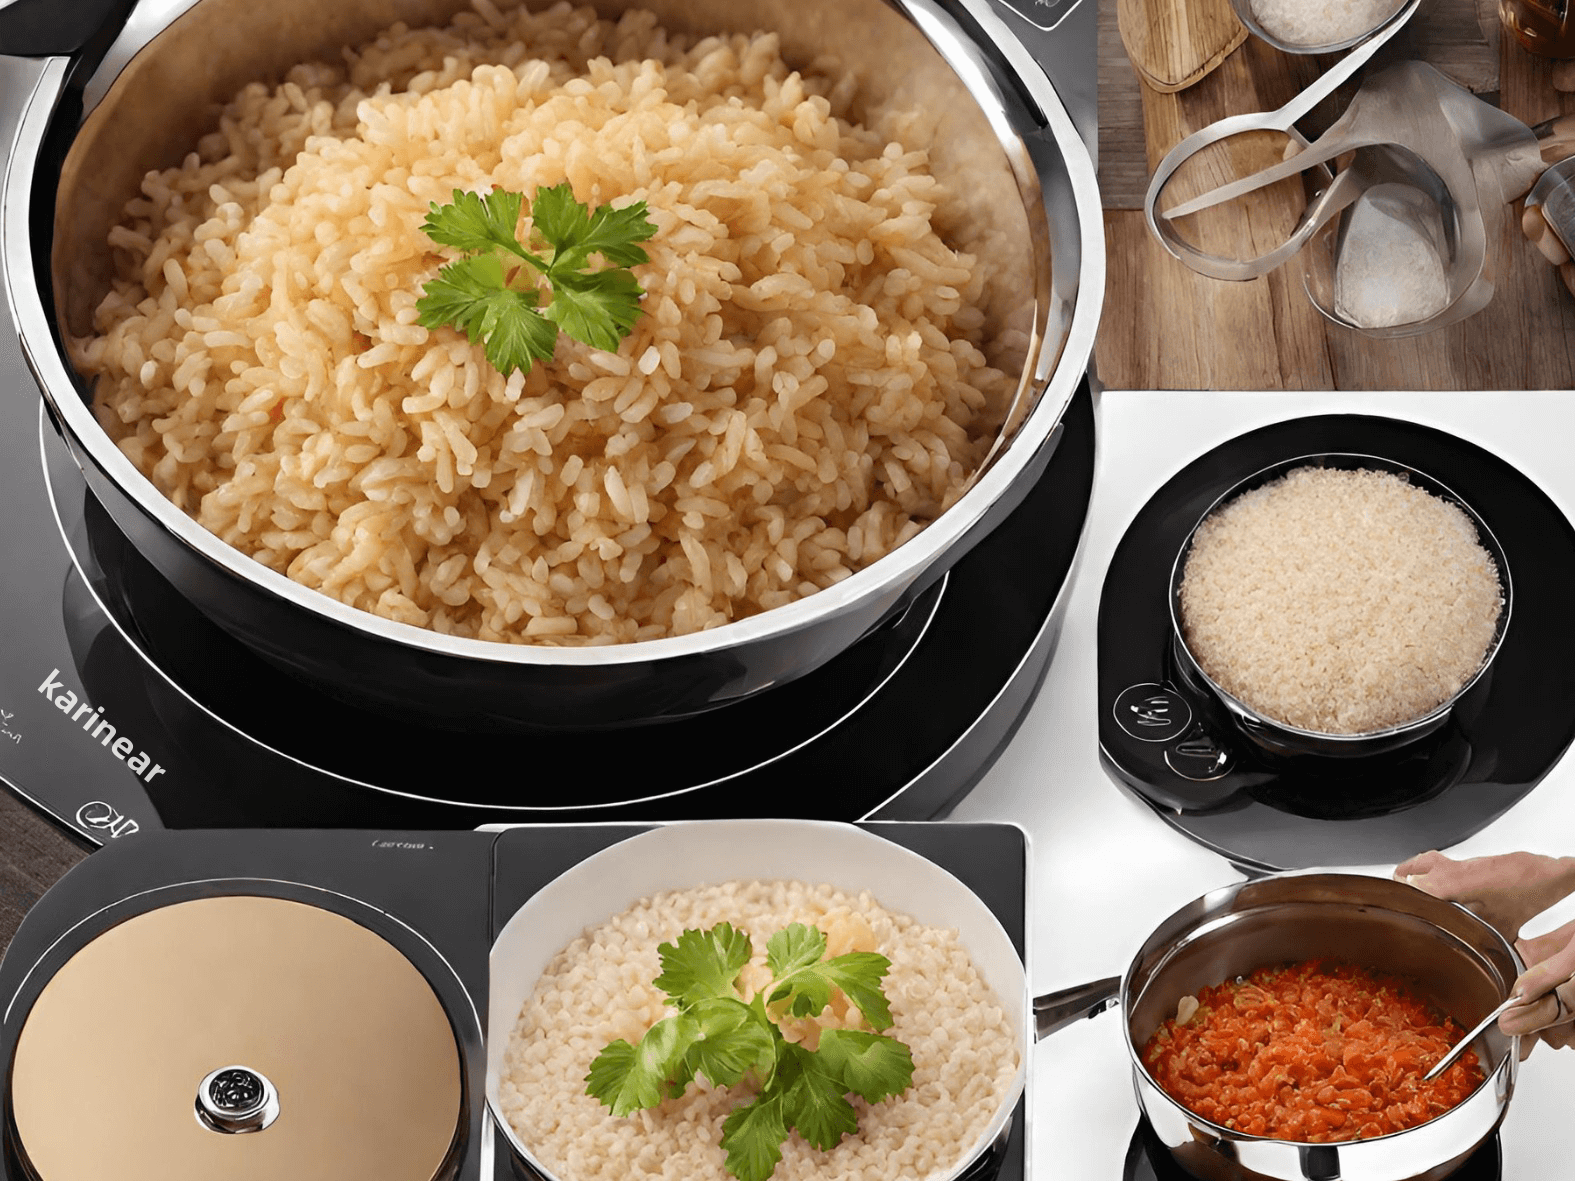 What are some tips for cooking brown rice on a portable induction burner? Is it even a good idea (pans, crockery, dishes, food, timing)?